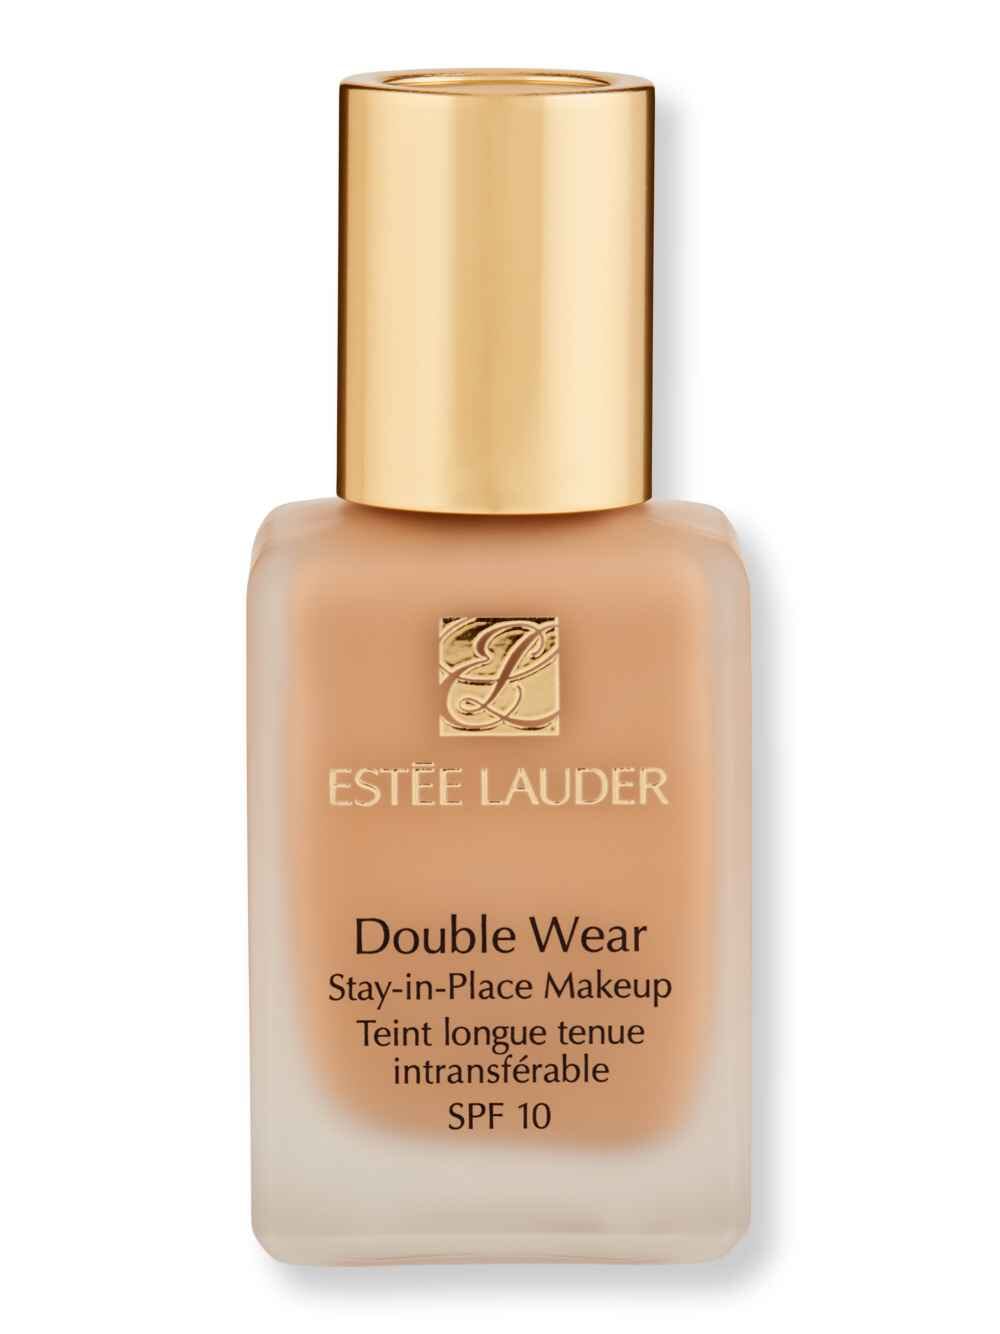 Estee Lauder Estee Lauder Double Wear Stay-In-Place Makeup 30 ml4N1 Shell Beige Tinted Moisturizers & Foundations 